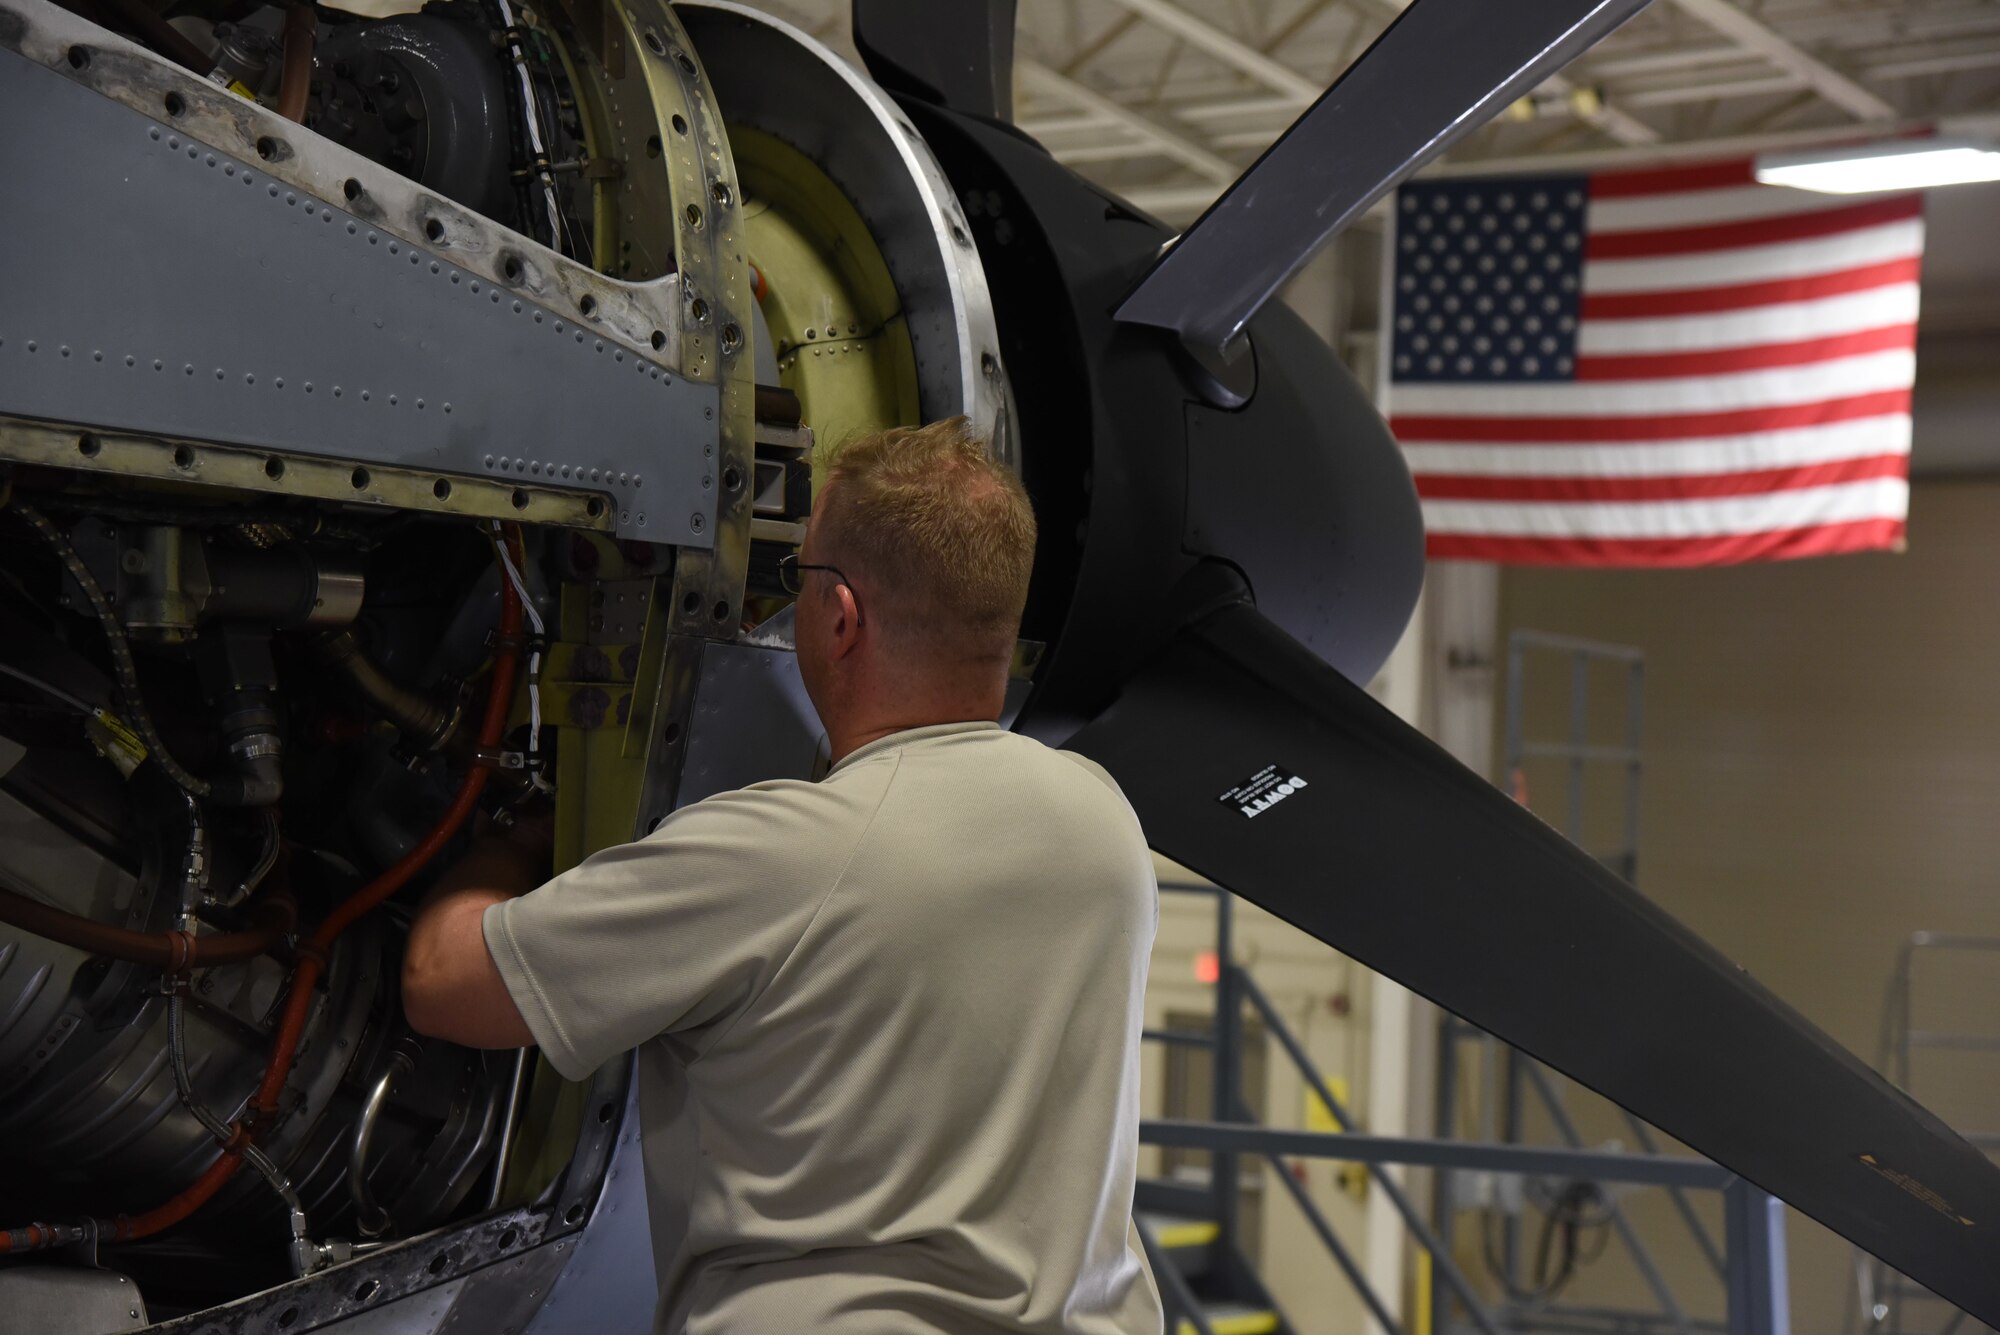 Tech. Sgt. Christopher Botts, 403rd Maintenance Squadron aircraft engine mechanic, works to remove a turbine vibration sensor from a WC-130J engine Jan. 13, 2019. Once removed, Botts will inspect the sensor, thoroughly clean it and reconnect it. (U.S. Air Force photo by Senior Airman Kristen Pittman)